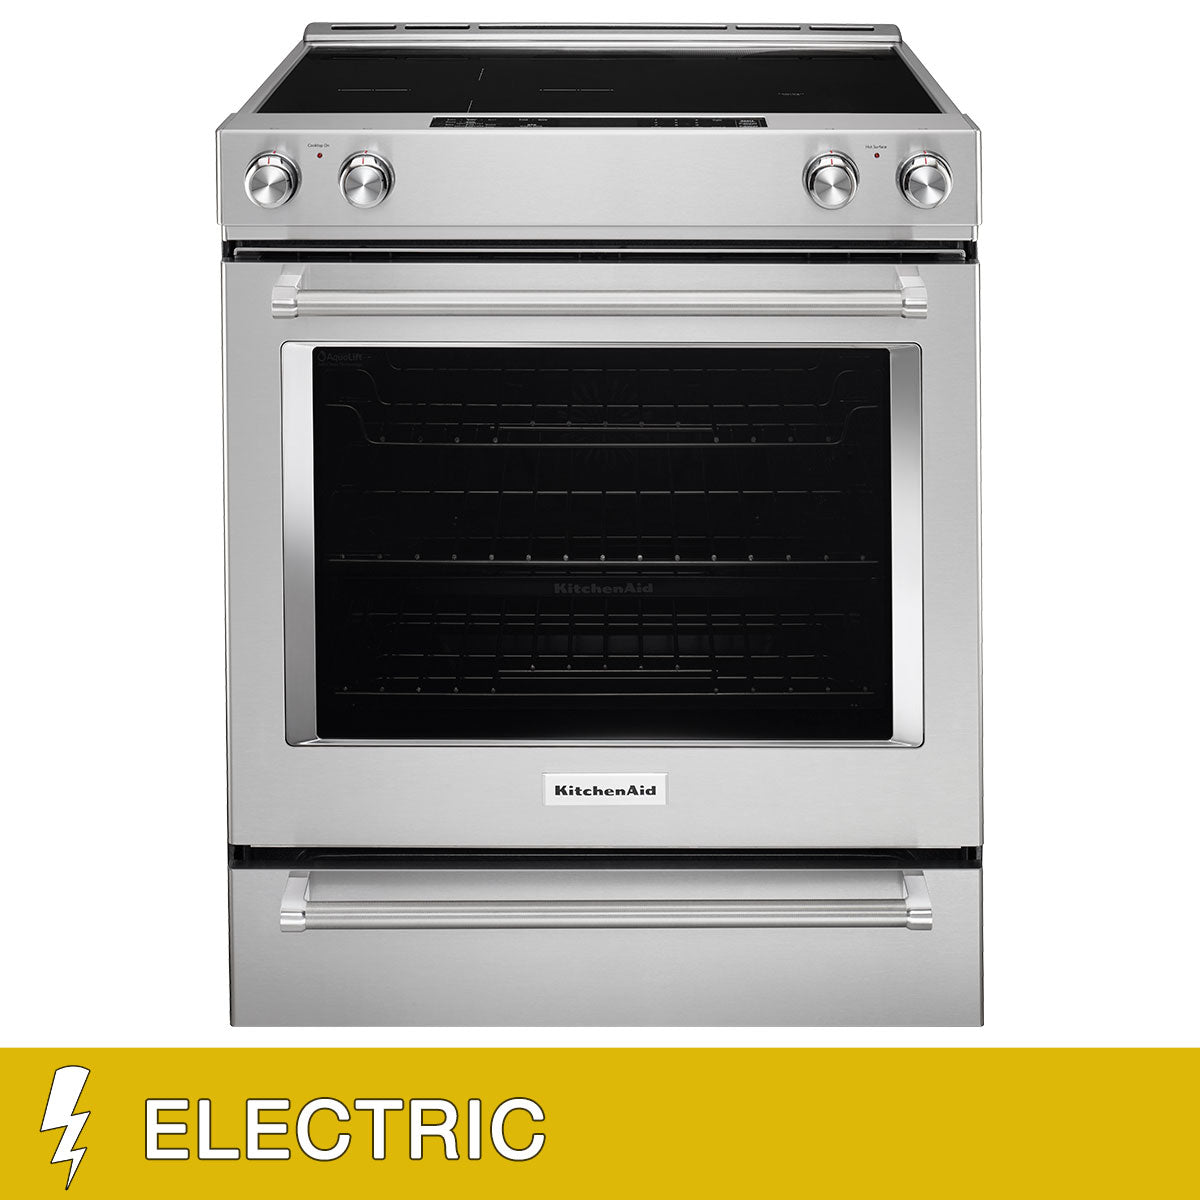 KitchenAid 5.8CuFt Slide-In ELECTRIC Convection Range with Baking Drawer, AquaLift Self Clean in Stainless Steel Image